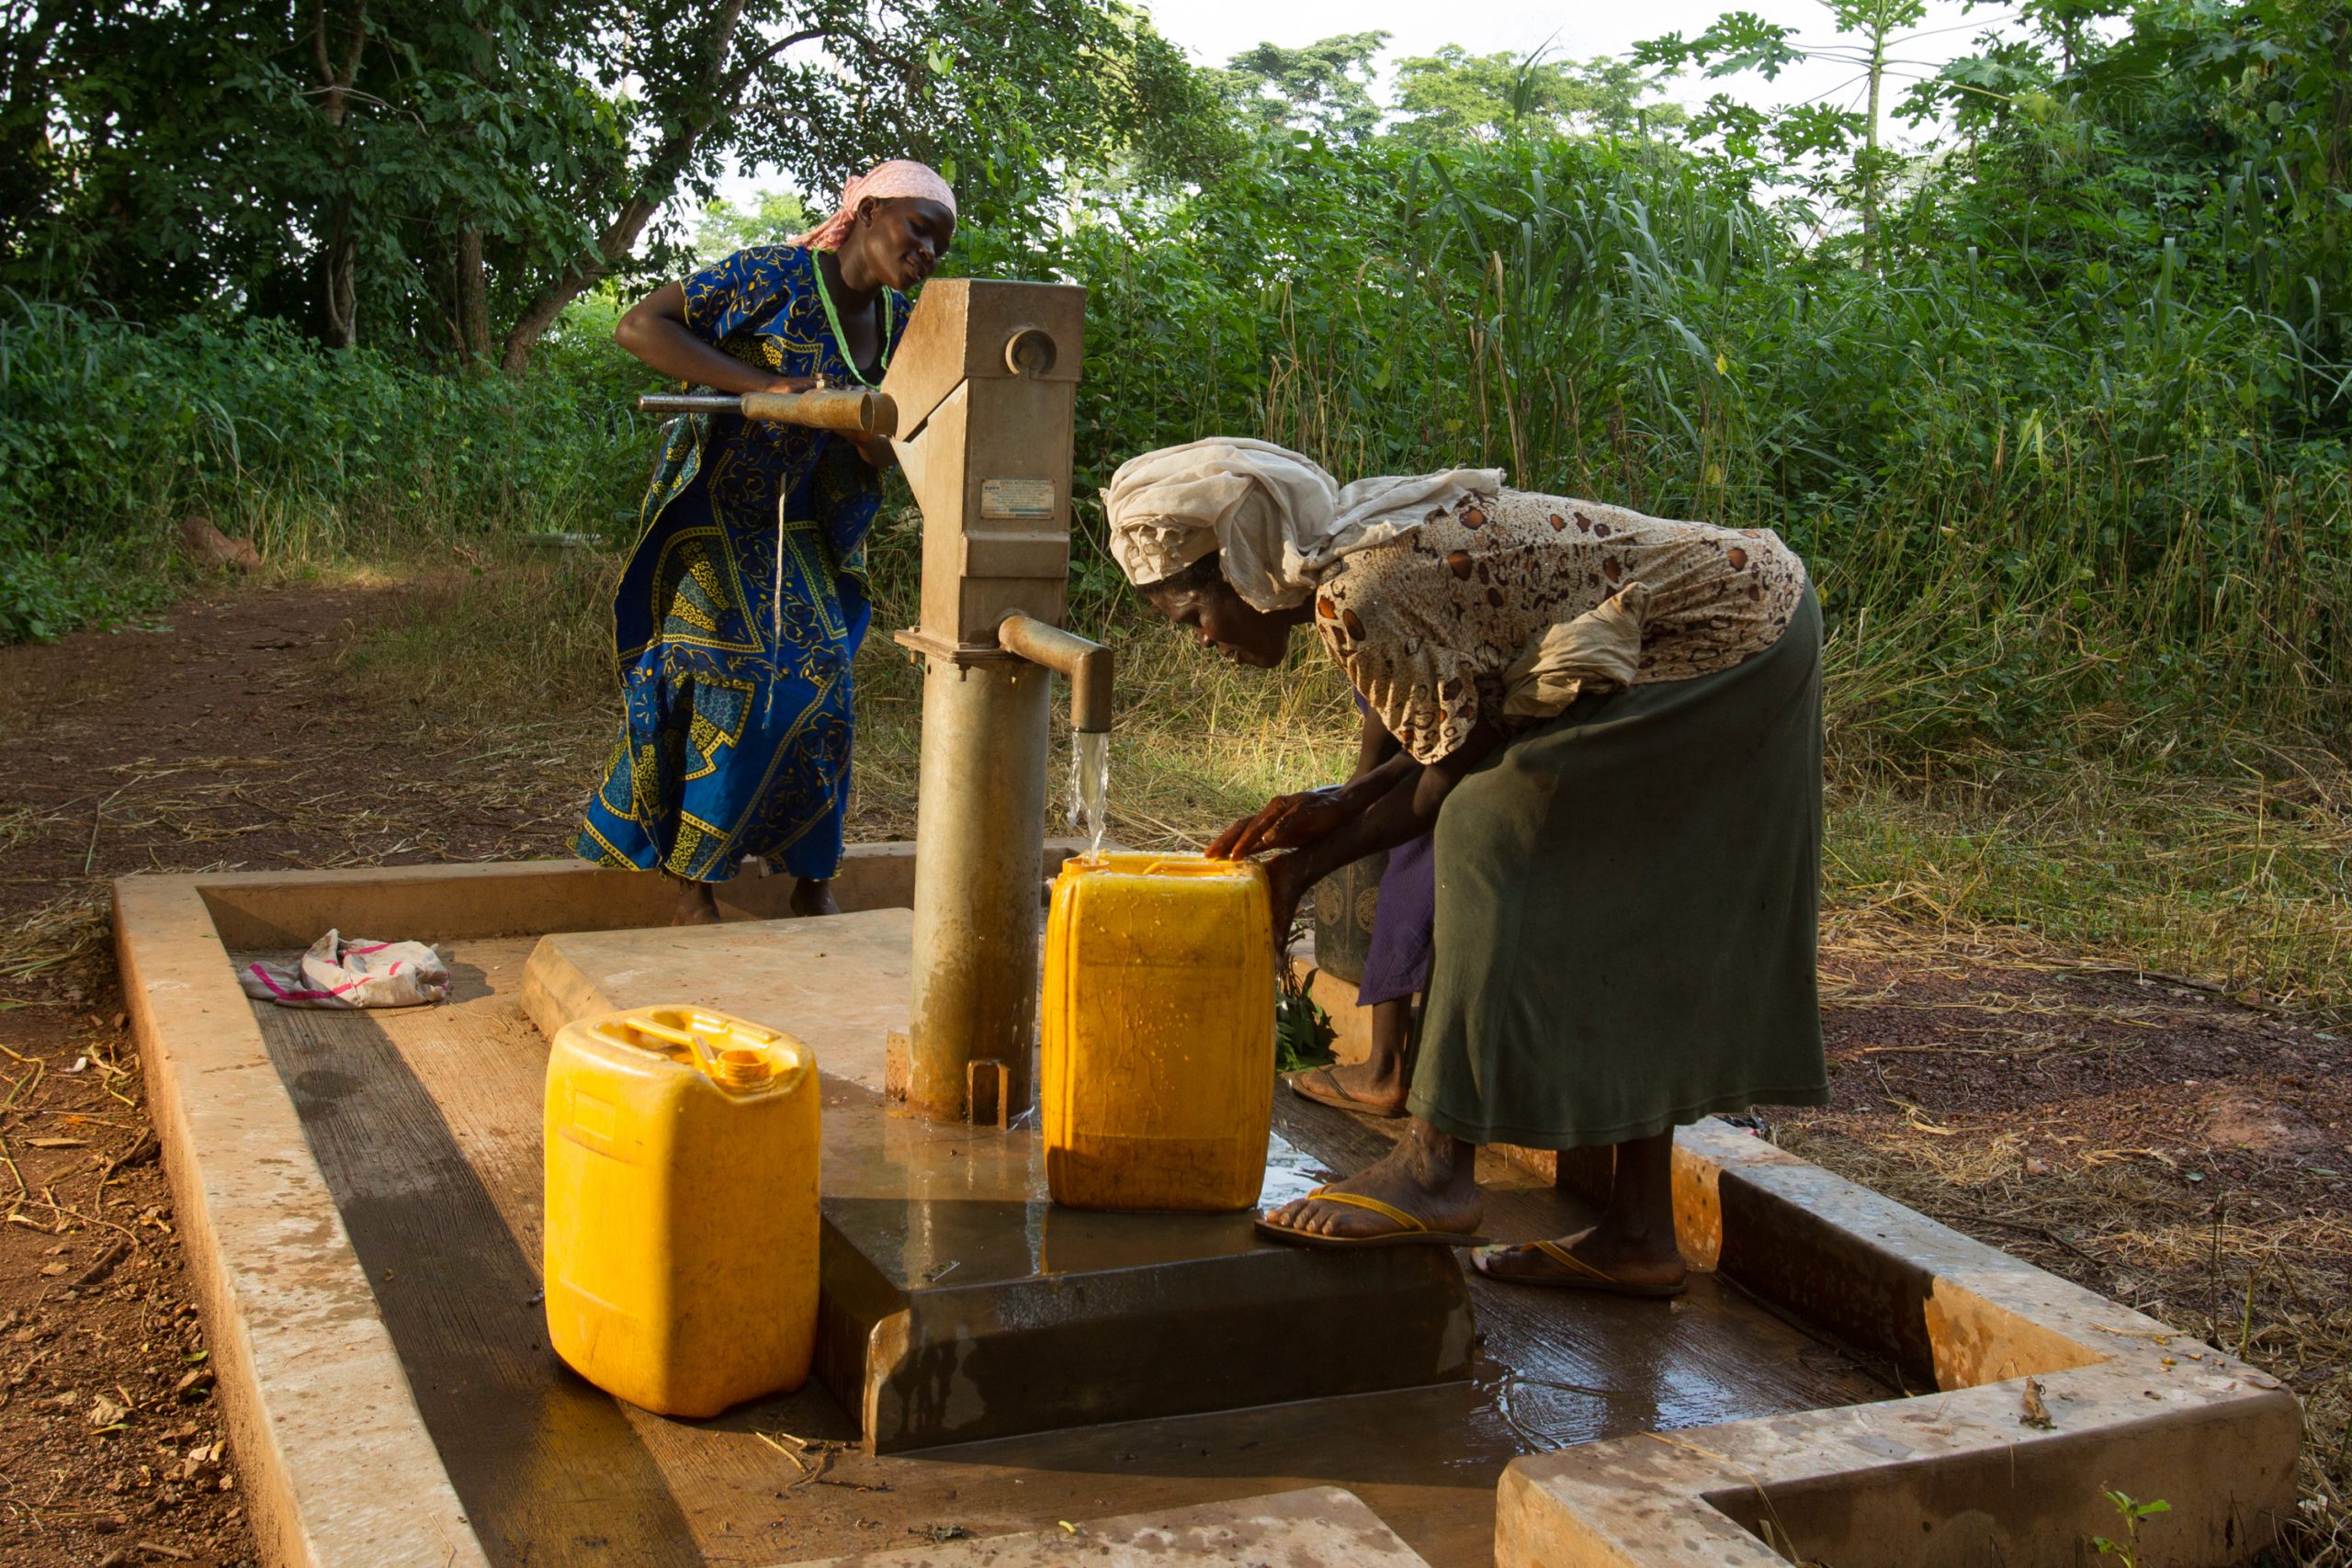 Women operate a repaired well in the village of Do Meabra, Ghana, 5 May 2013. The well was drilled with support from Matching Grant 69051. Training for residents to repair wells was provided with support from Global Grant 25922. Find the story in 